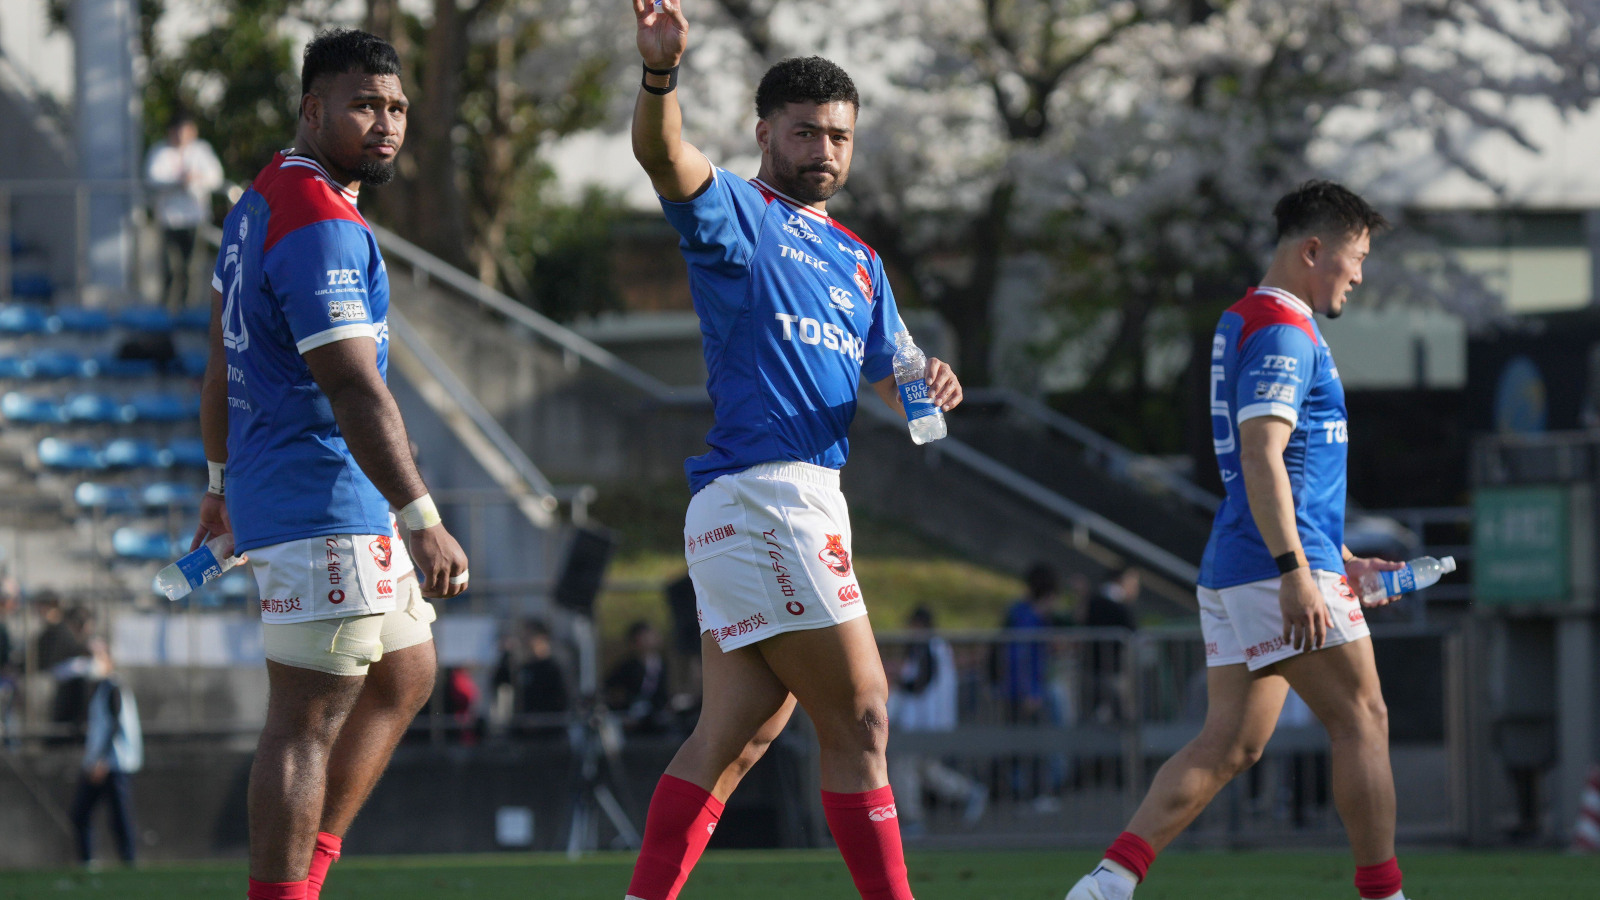 richie mo’unga back with a bang ahead of japan rugby league one semi-finals